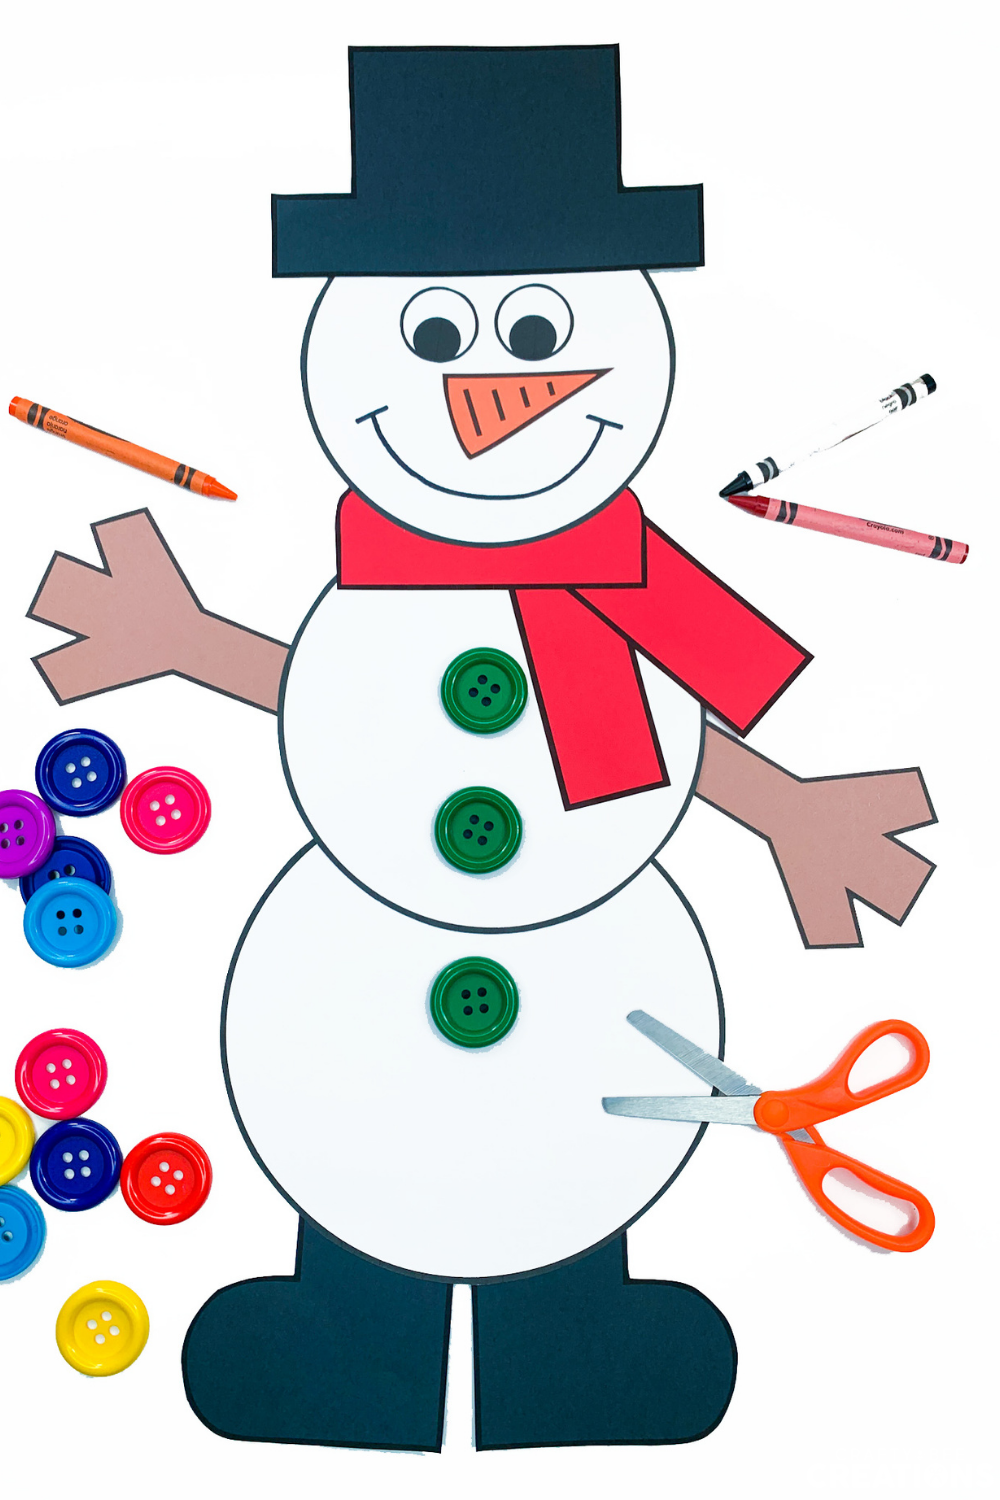 This snowman craft has read green buttons on its belly. There are crayons lying on the white table beside it as well as other colored buttons. This snowman has a red scarf. A pair of orange scissors is on the page also.